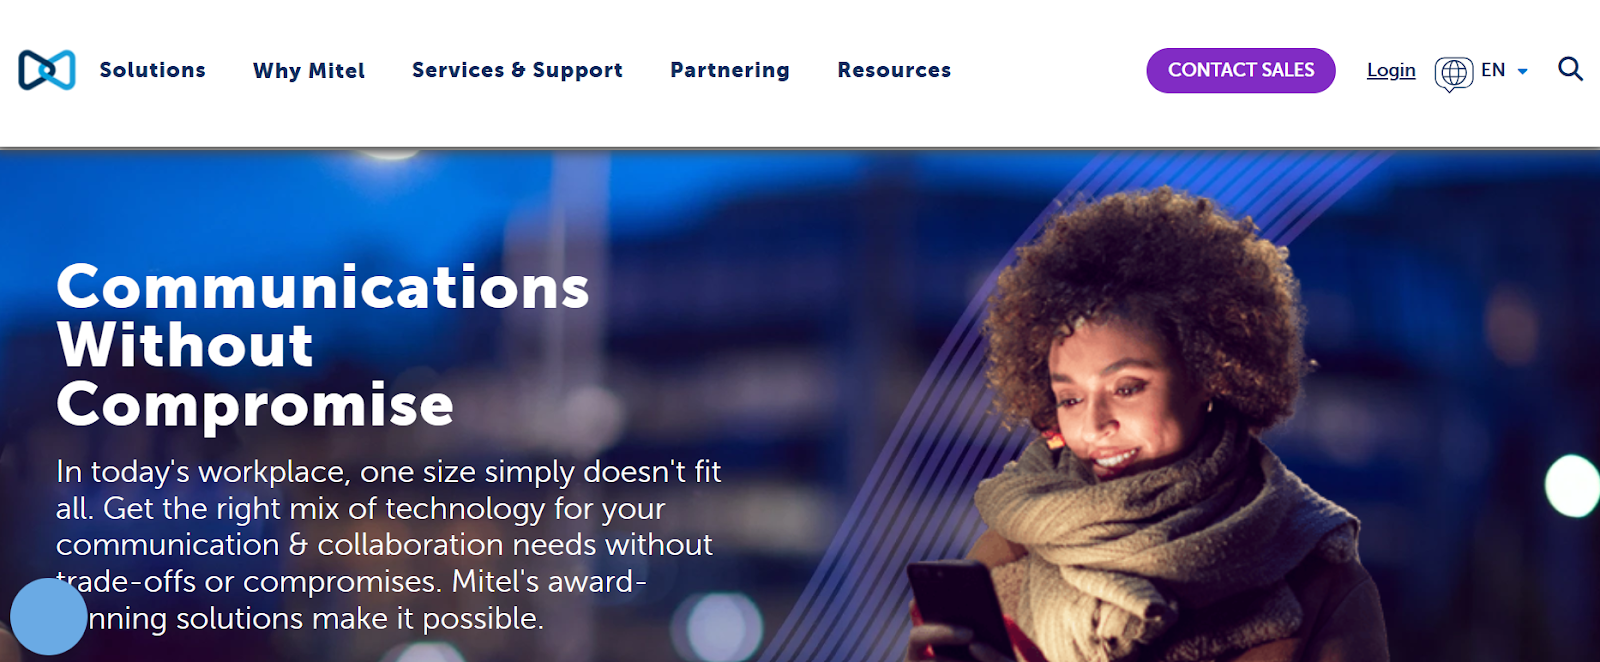 Mitel website snapshot highlighting the services it offers.